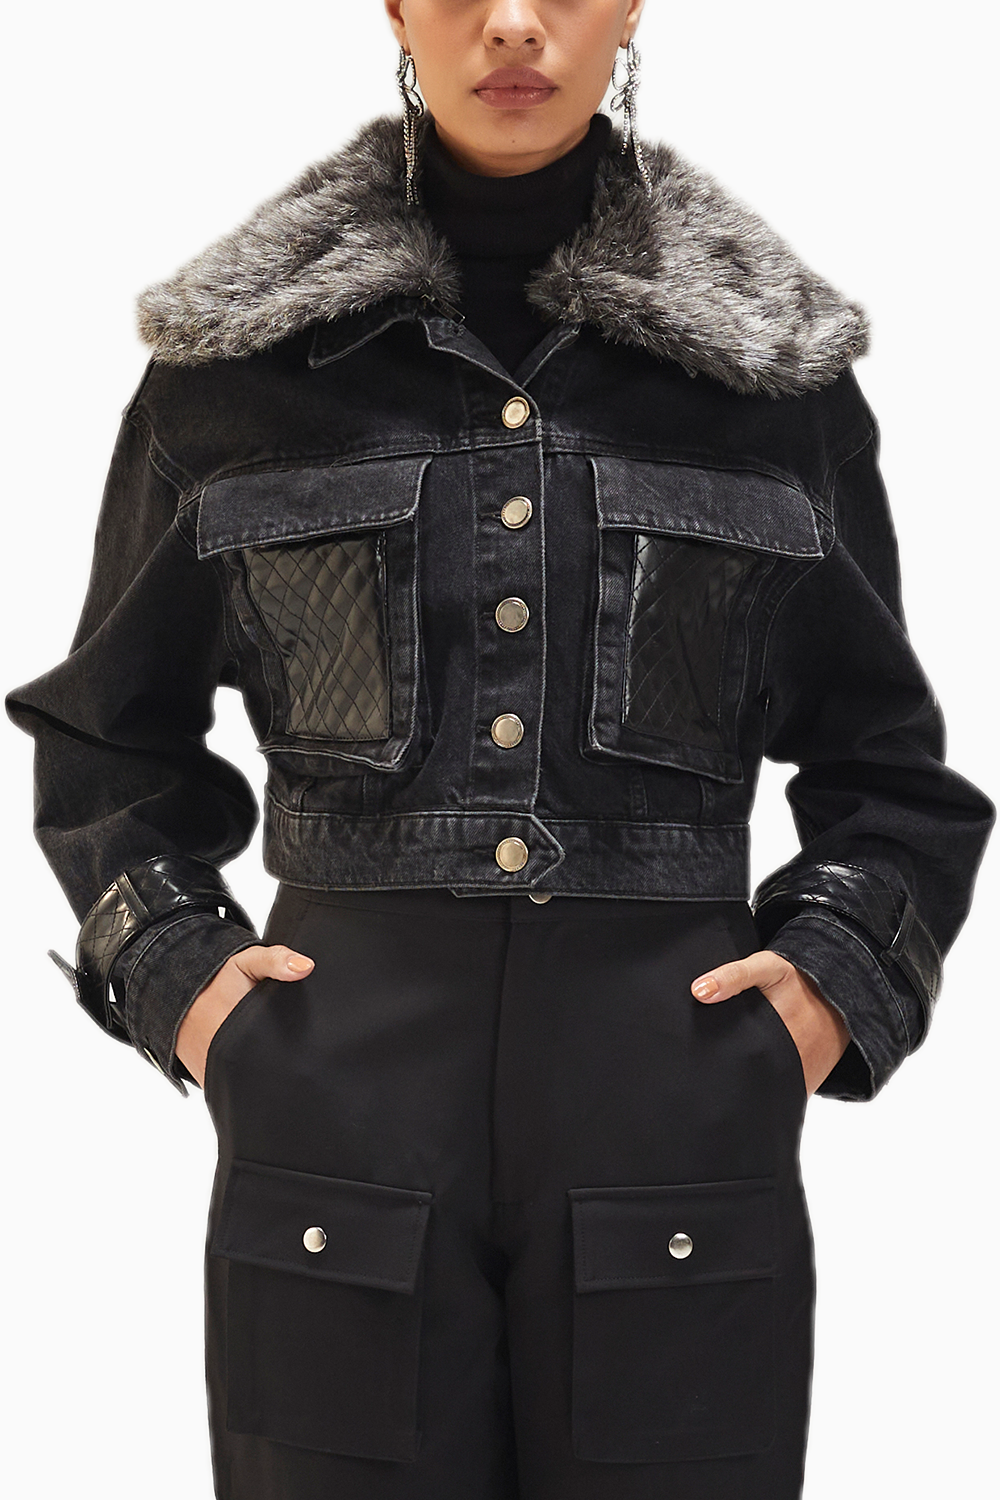 Black Denim Jacket With Fur Collar And Faux Leather Detail